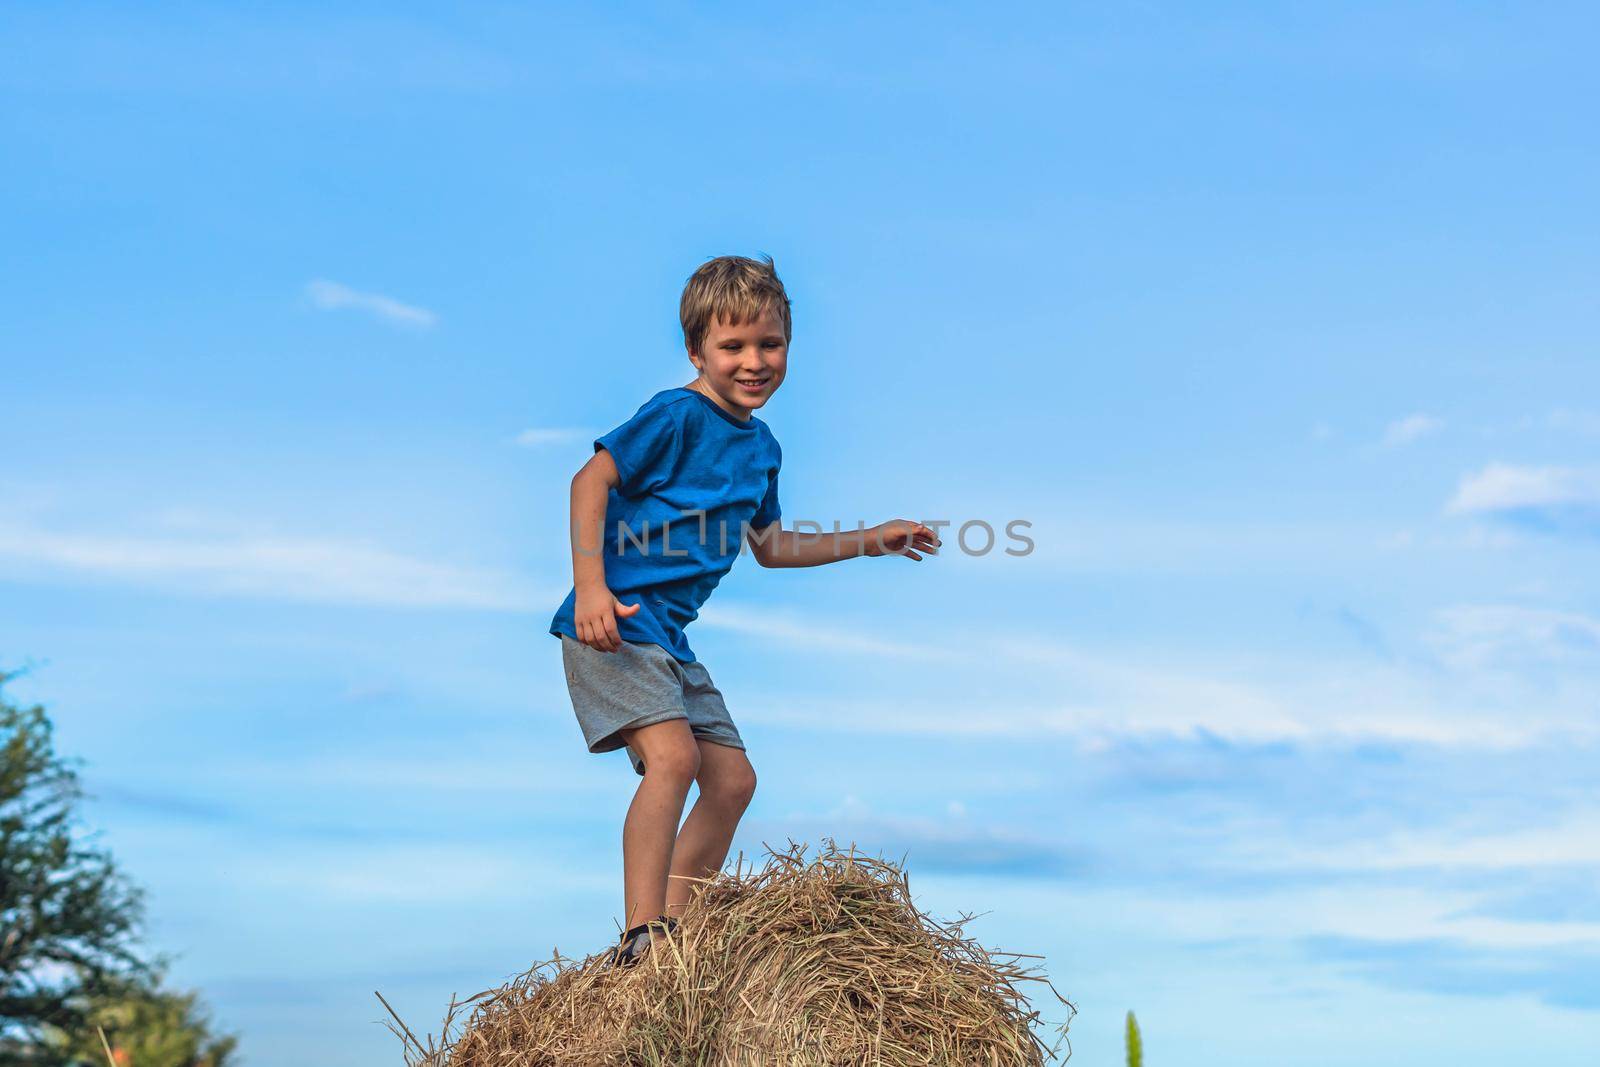 Boy smile play dance grimace show off blue t-shirt stand on haystack bales of dry grass, clear sky sunny day. Balance training. Concept happy childhood, children outdoors, clean air close to nature.